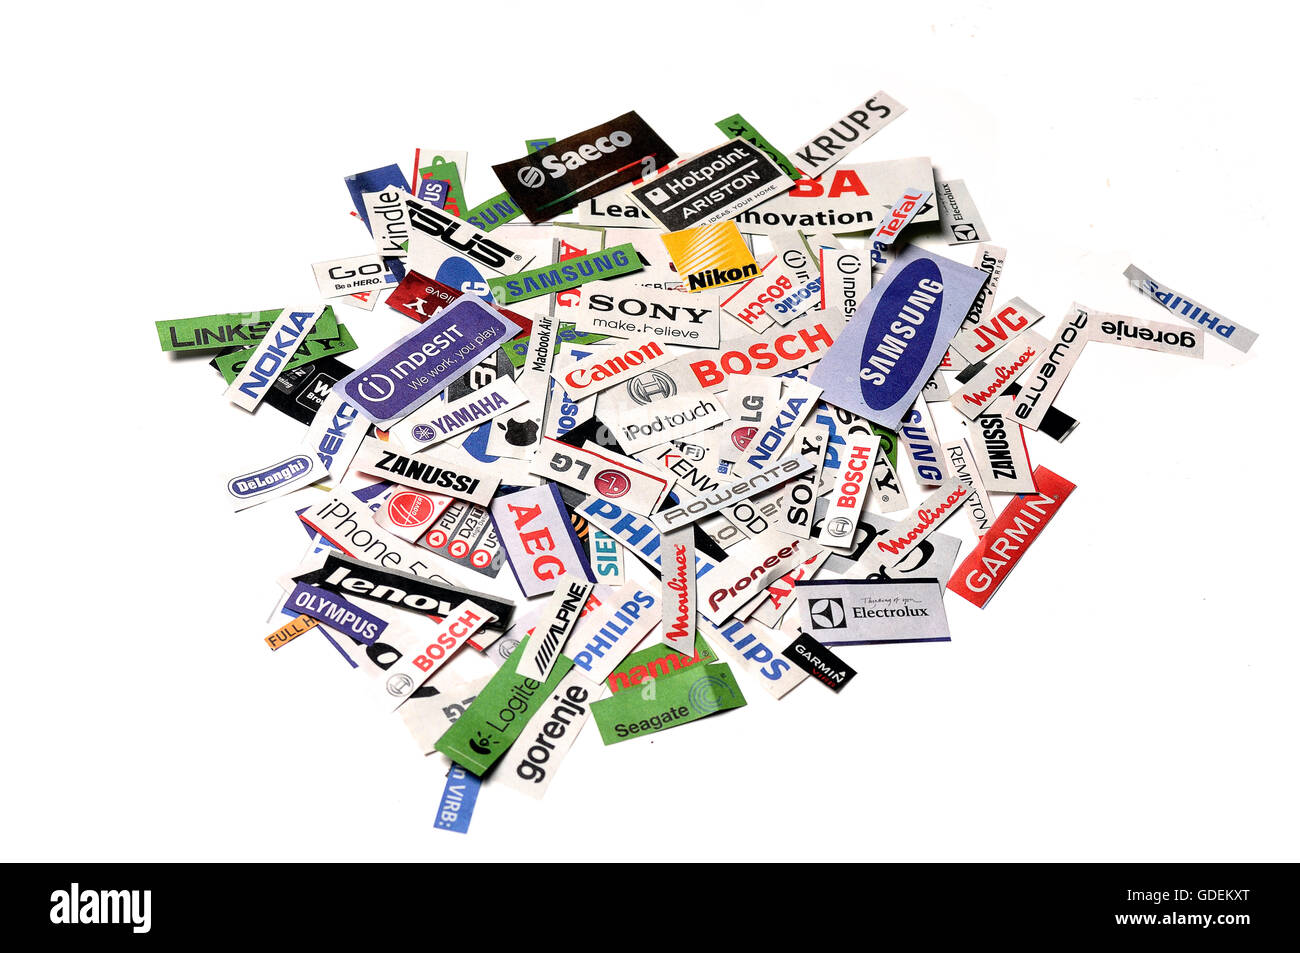 A grungy, grainy  collage made up of newspaper clippings names of technology  brands Stock Photo